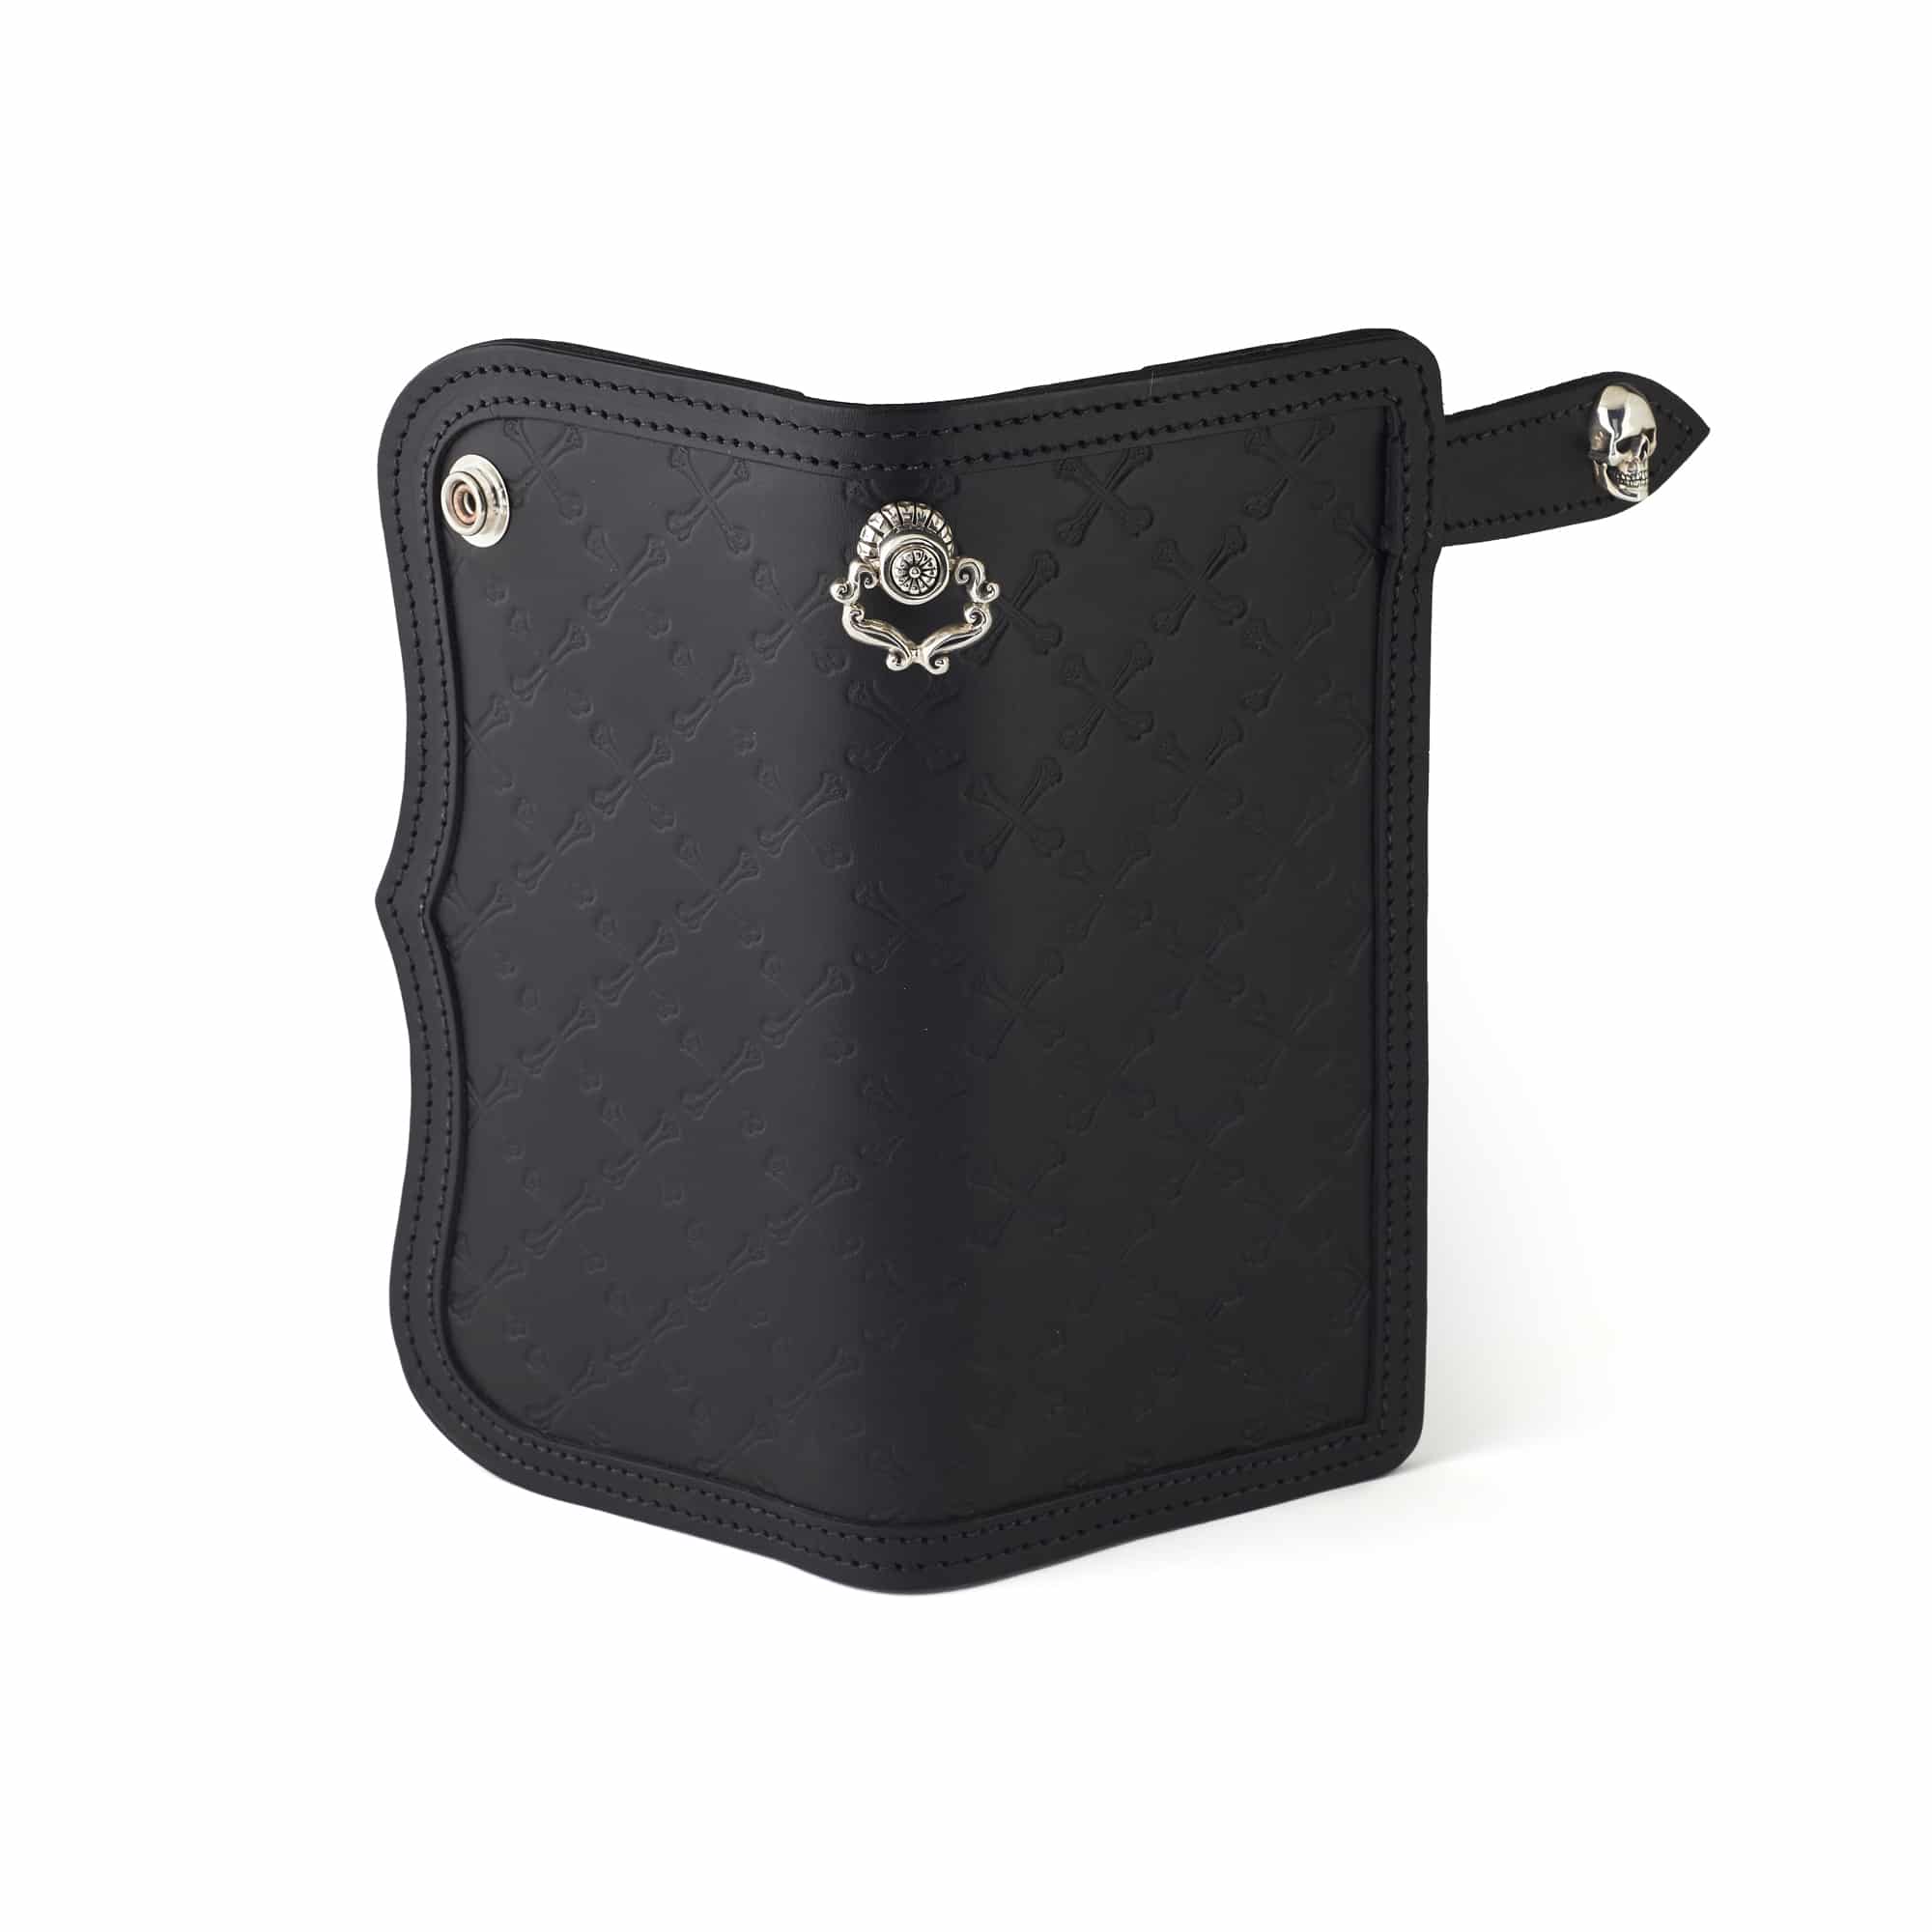 Leather Monogram Wallet - The Great Frog London - USA